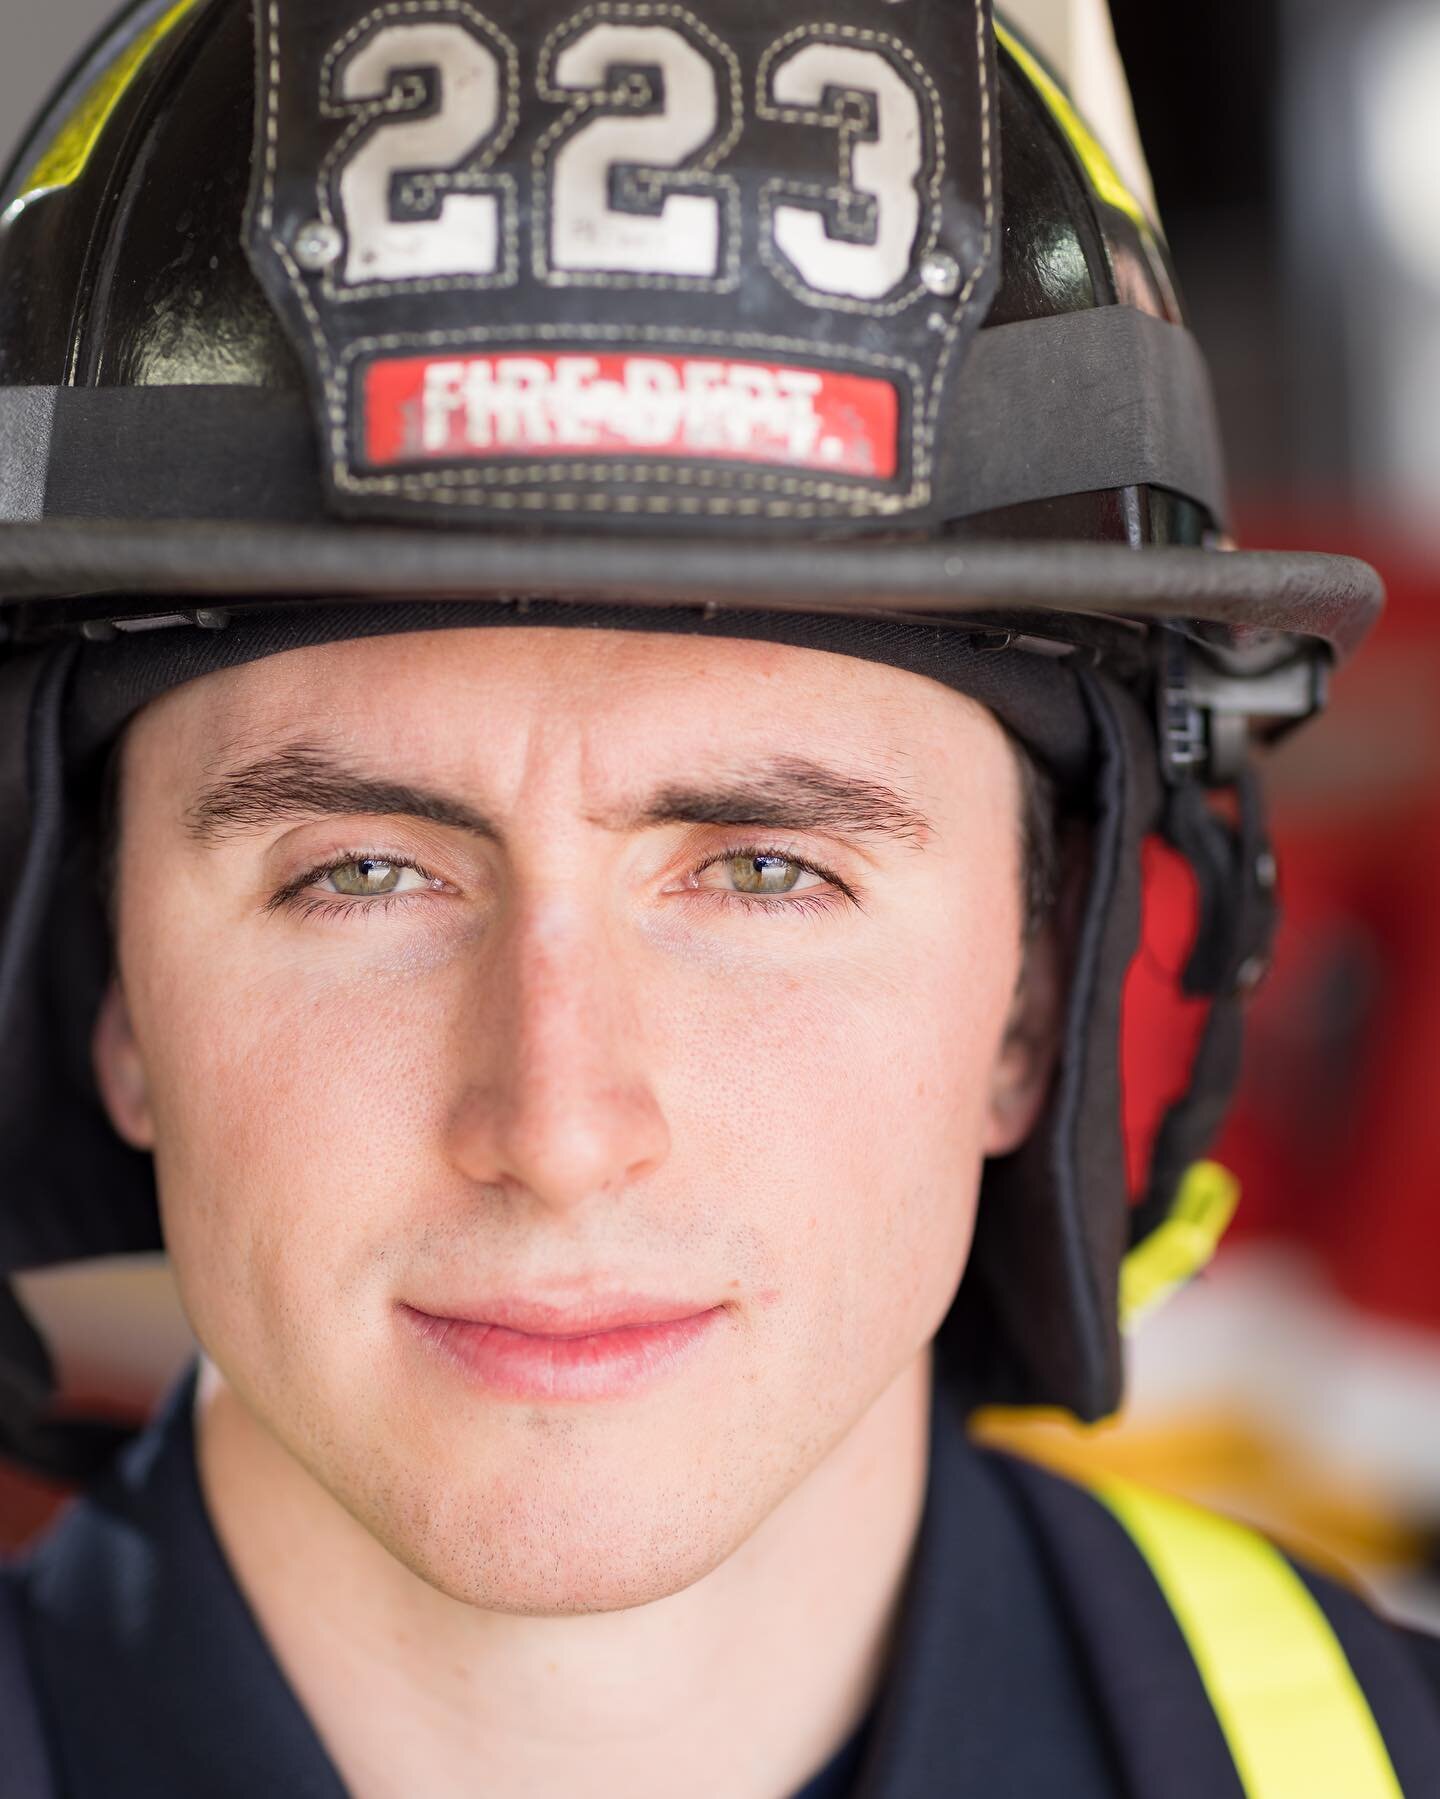 I took a trip to my local firehouse and got to meet our firefighters and capture them with my lens